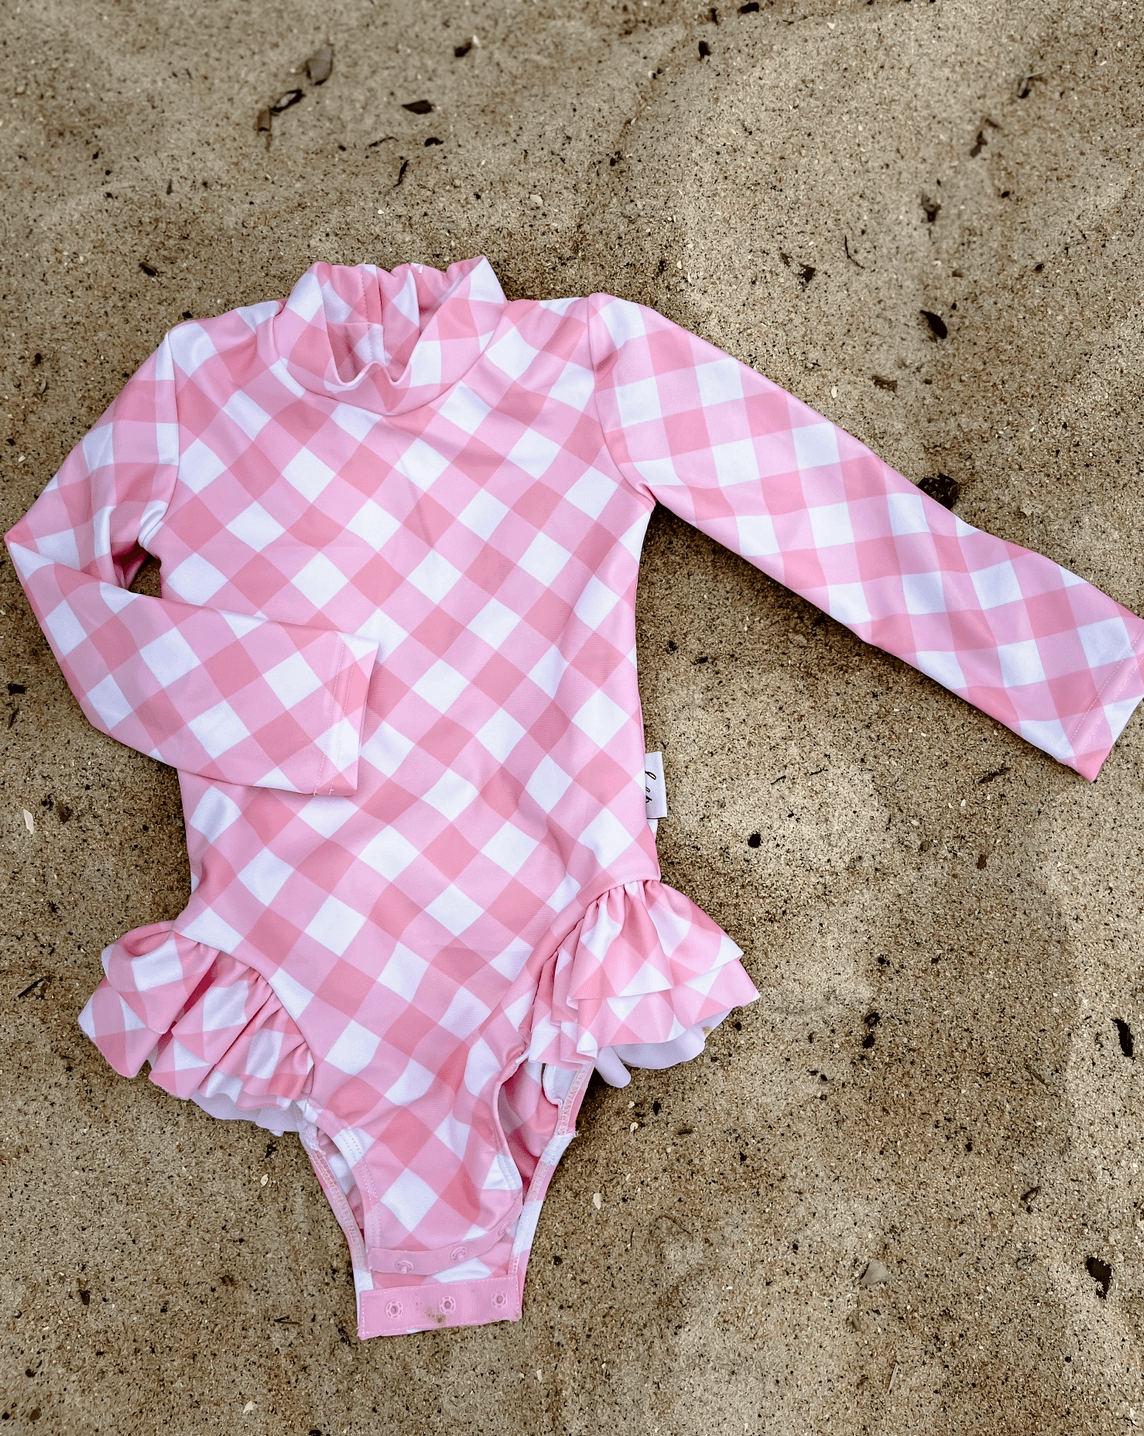 A pink gingham swimsuit with change snaps in sizes from newborn, toddler and school age